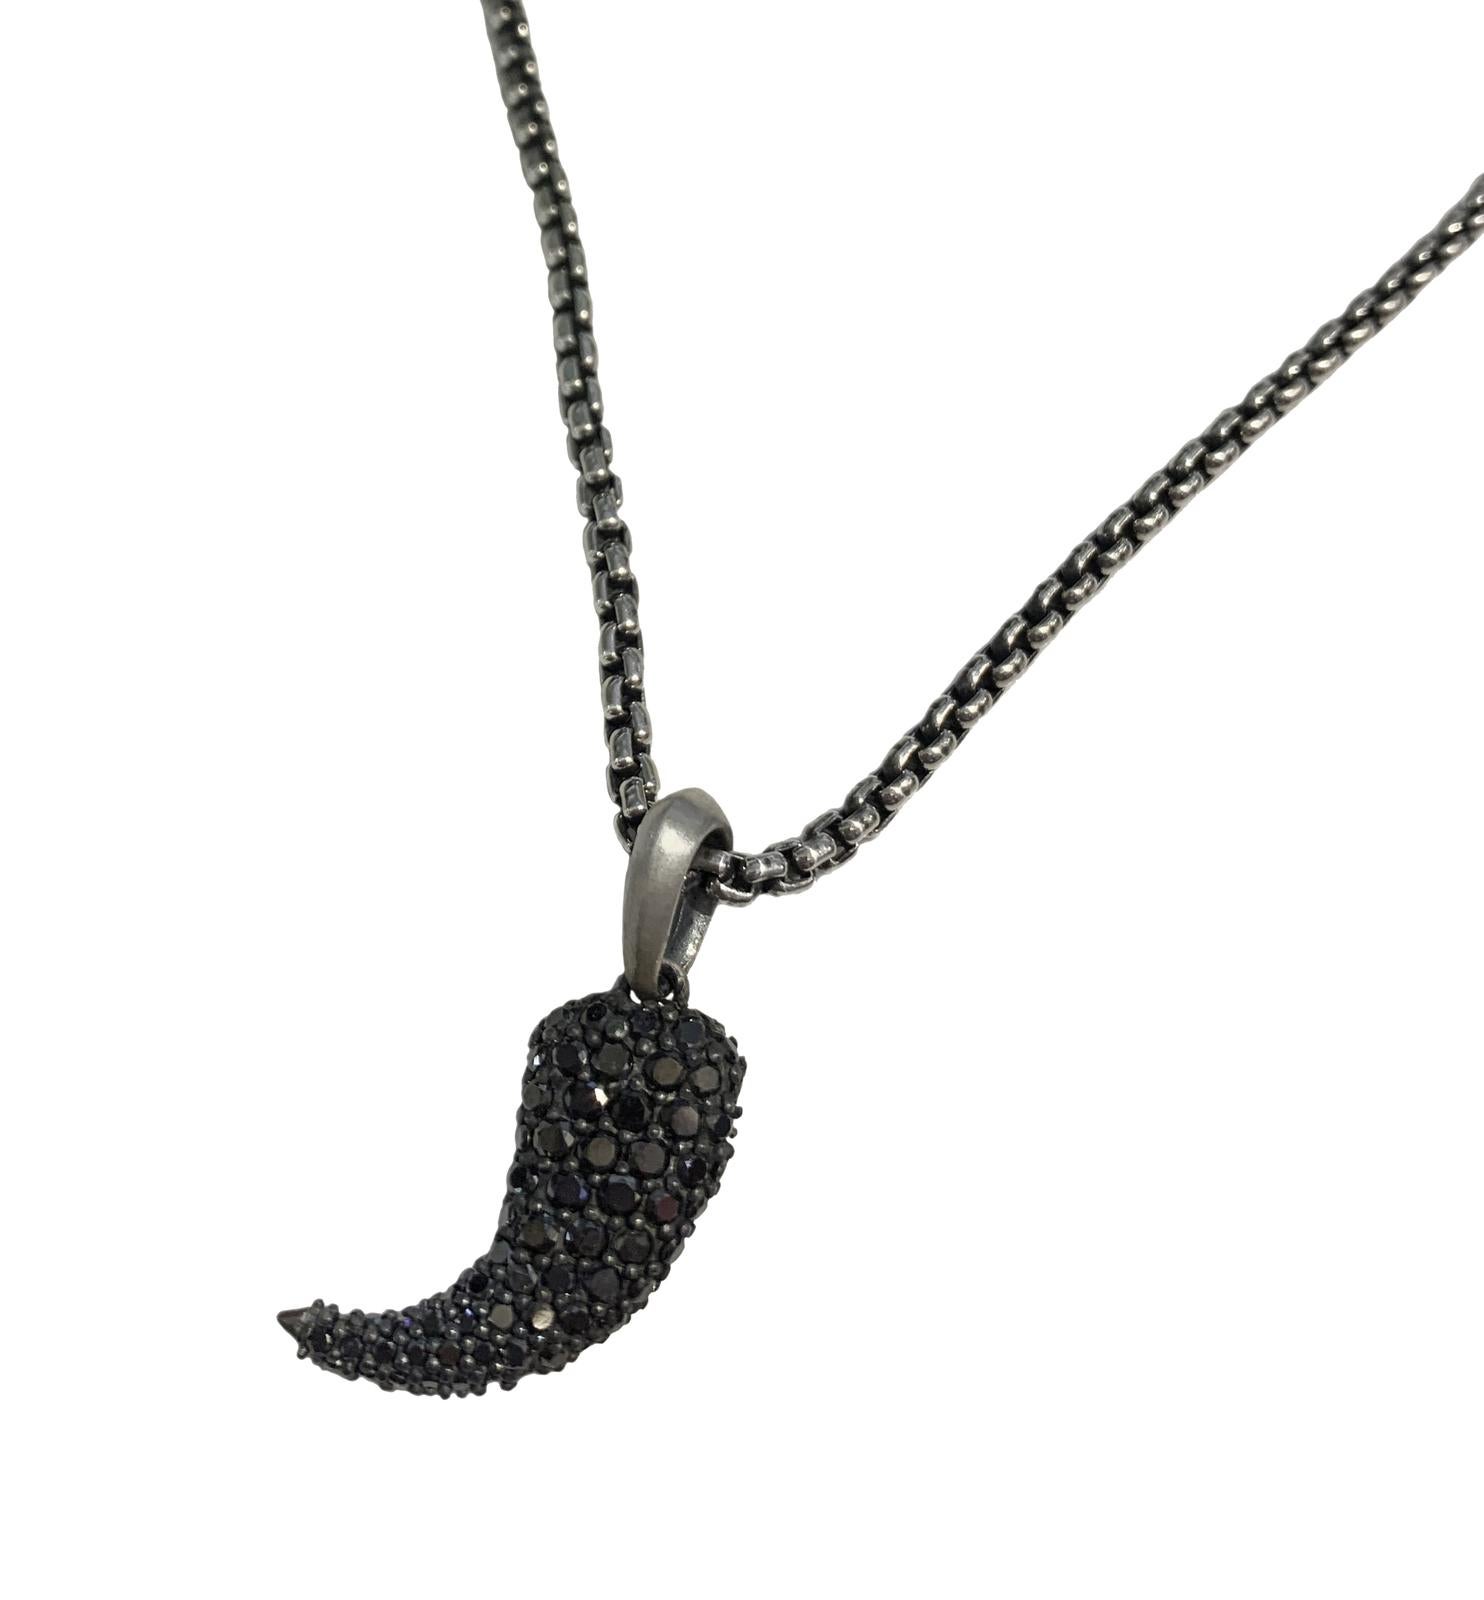 -Sterling silver
-Claw pendant is 3/4 long
-1.470 Carats of Pave Black Diamonds
-DY Chain: 22